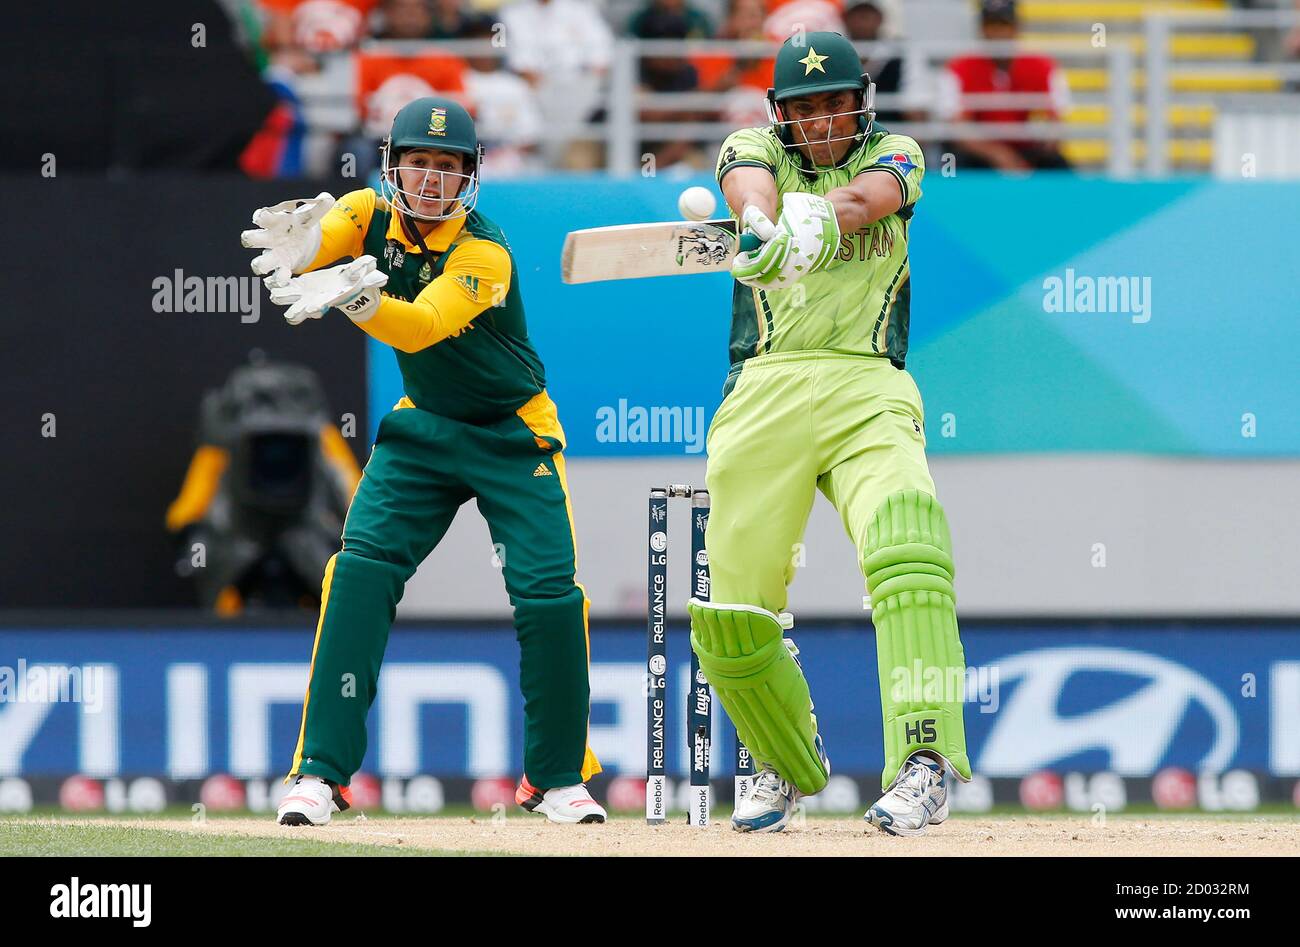 Pakistan's Younis Khan hits a four watched by South Africa's Quinton De Kock  (L) during their